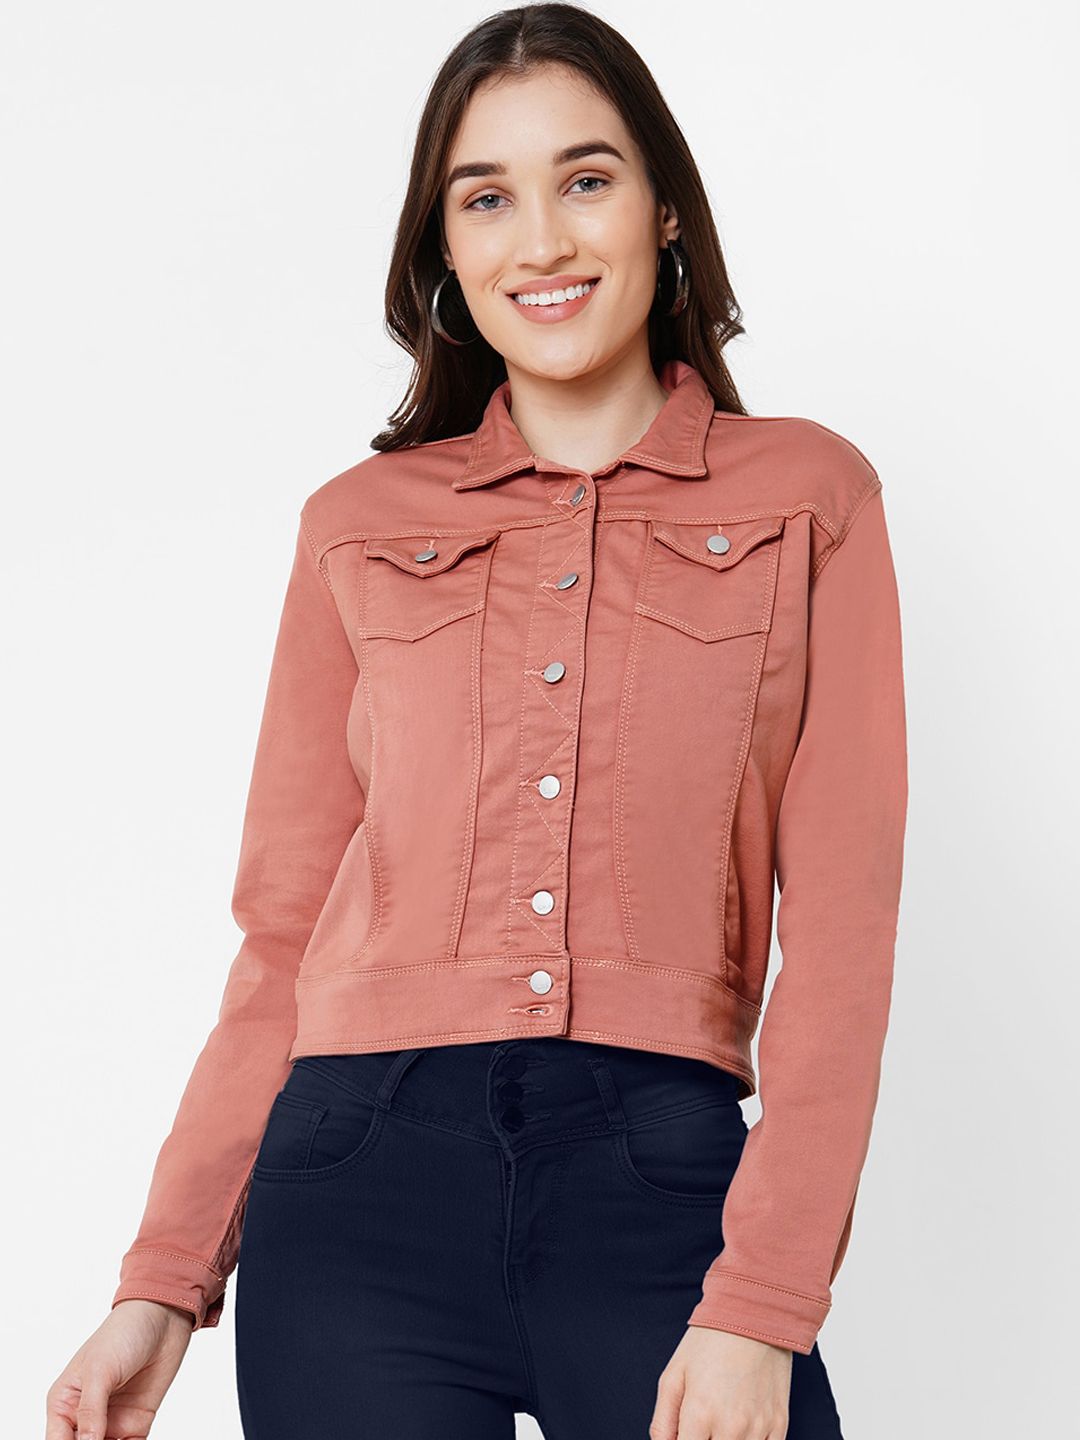 Kraus Jeans Women Peach-Coloured Washed Tailored Jacket Price in India